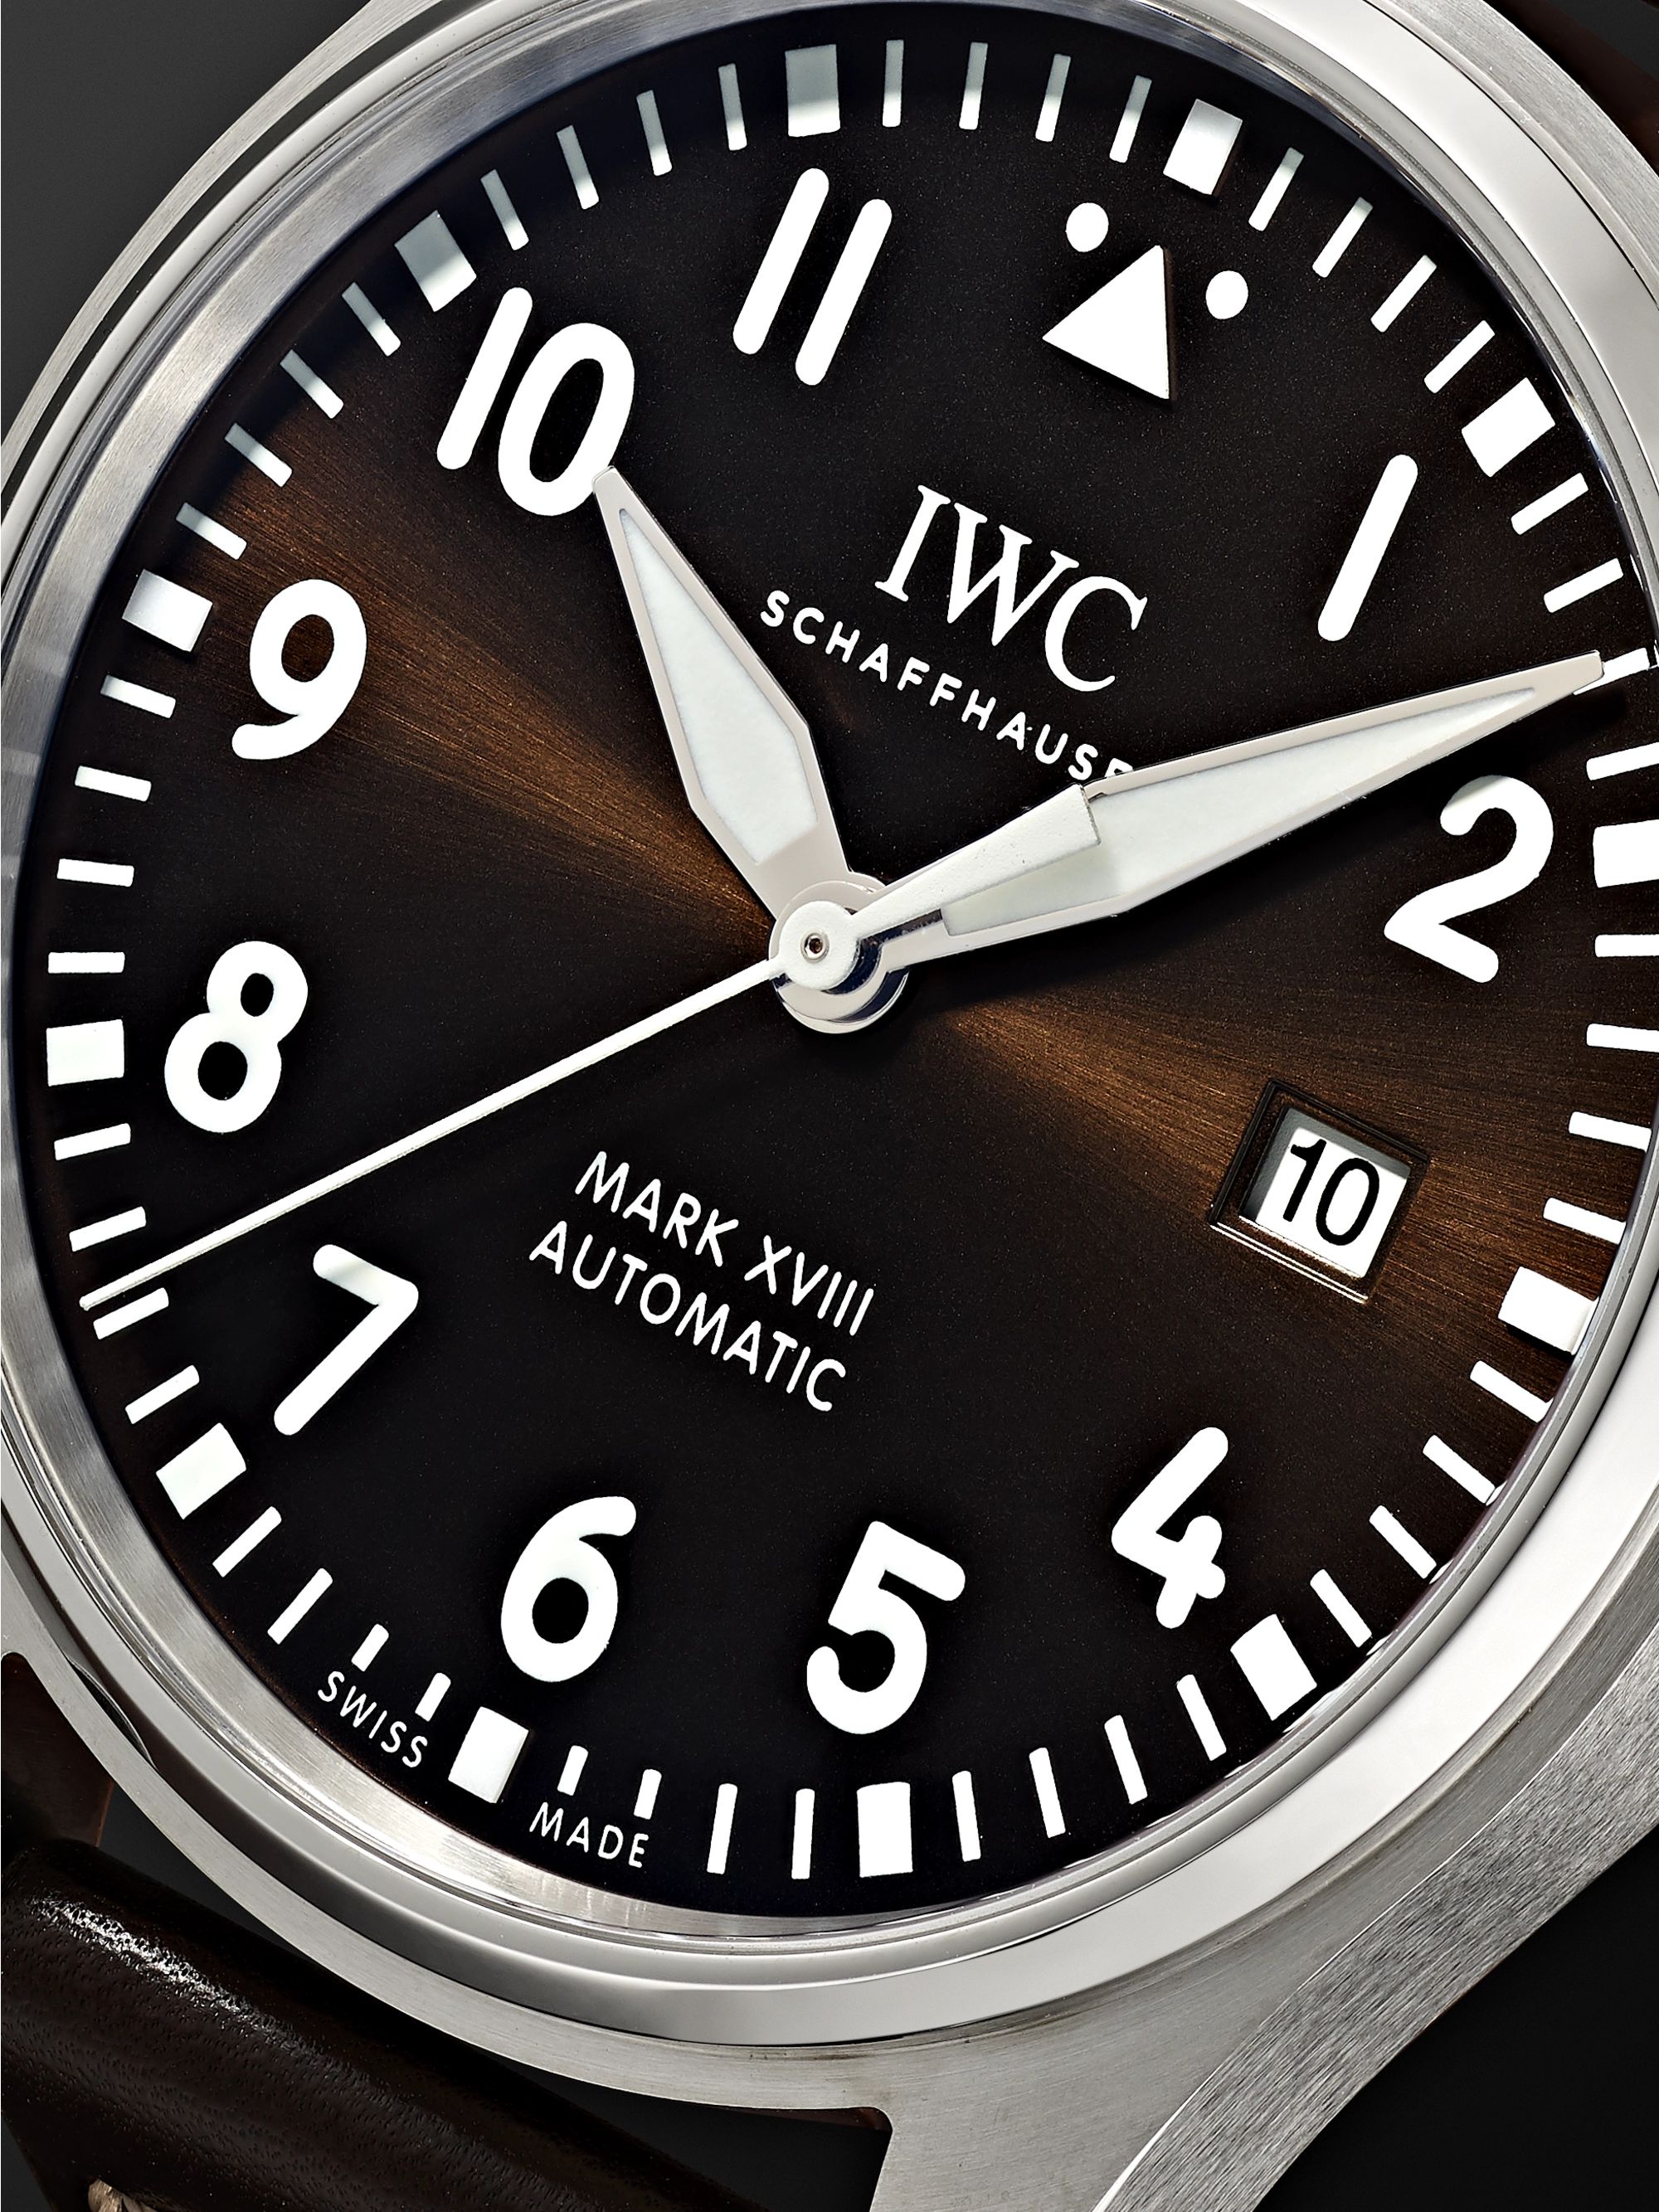 IWC SCHAFFHAUSEN Pilot's Mark XVIII Antoine de Saint Exupéry Edition Automatic 40mm Stainless Steel and Leather Watch, Ref. No. IW327003